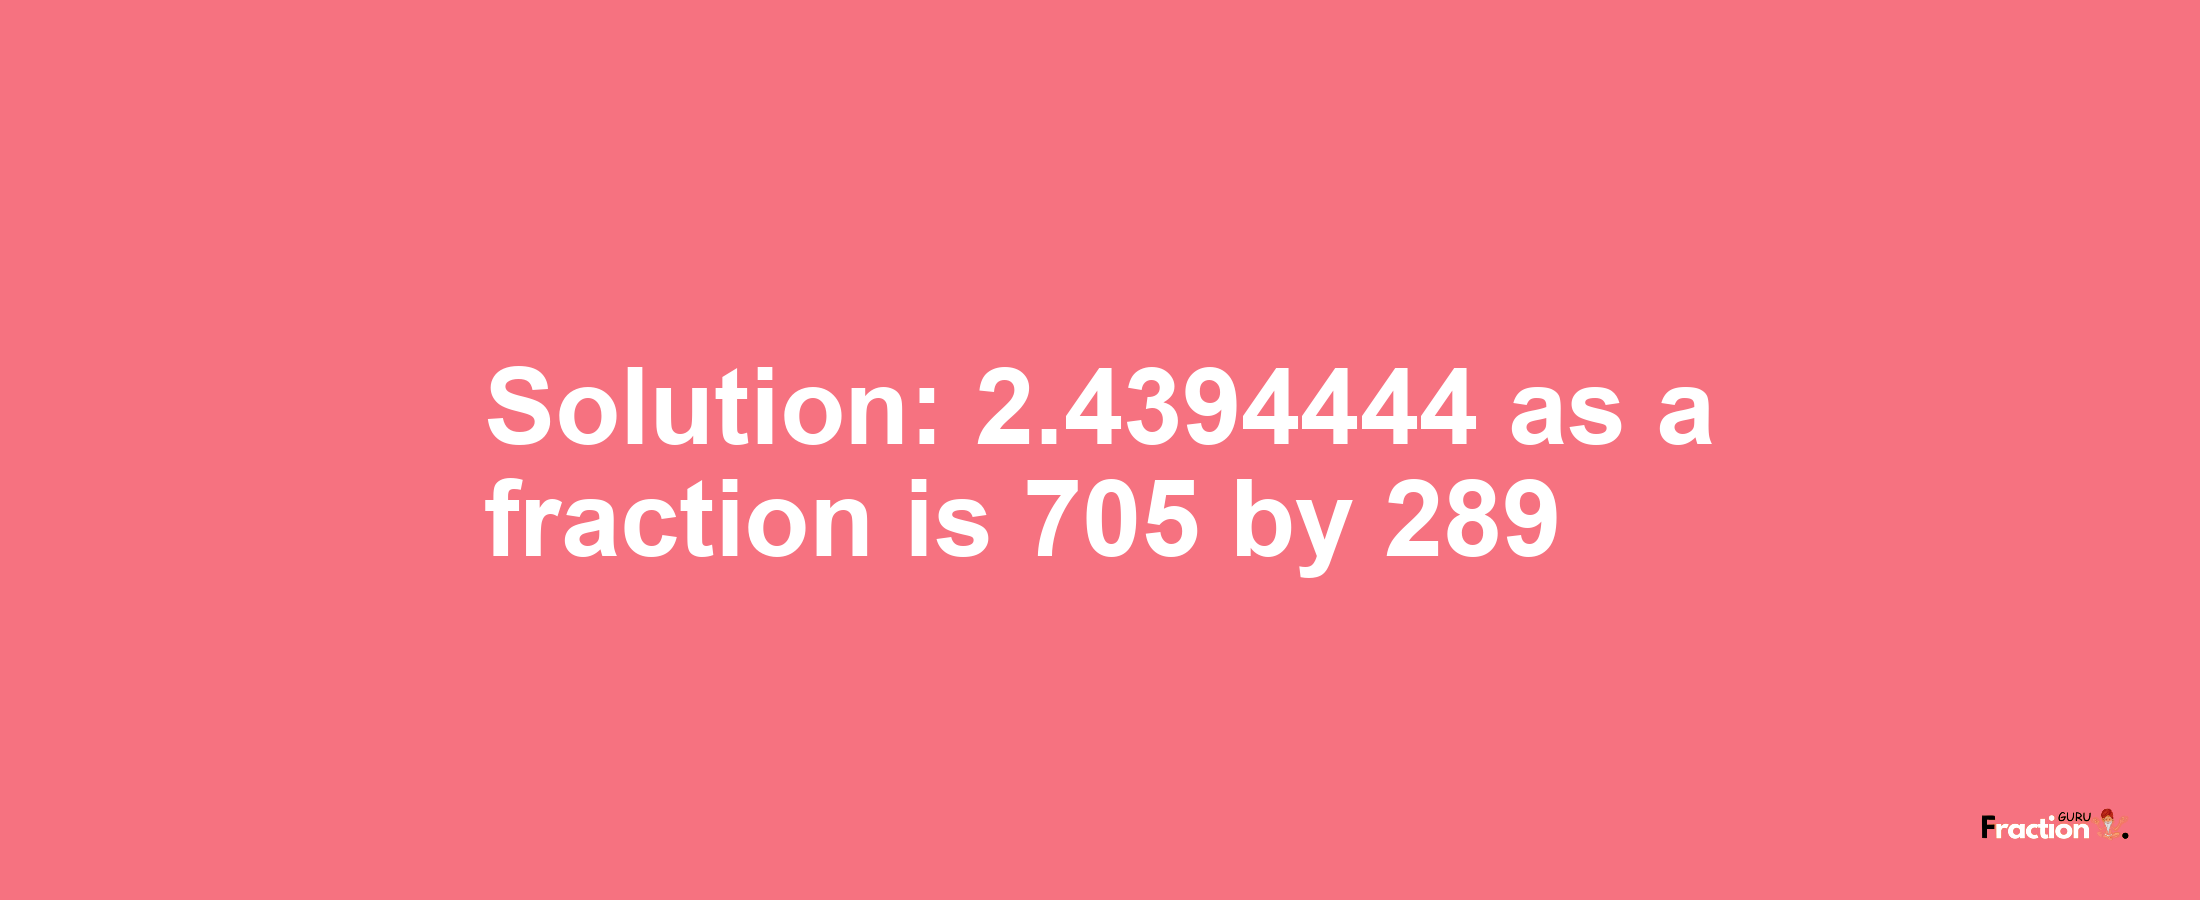 Solution:2.4394444 as a fraction is 705/289